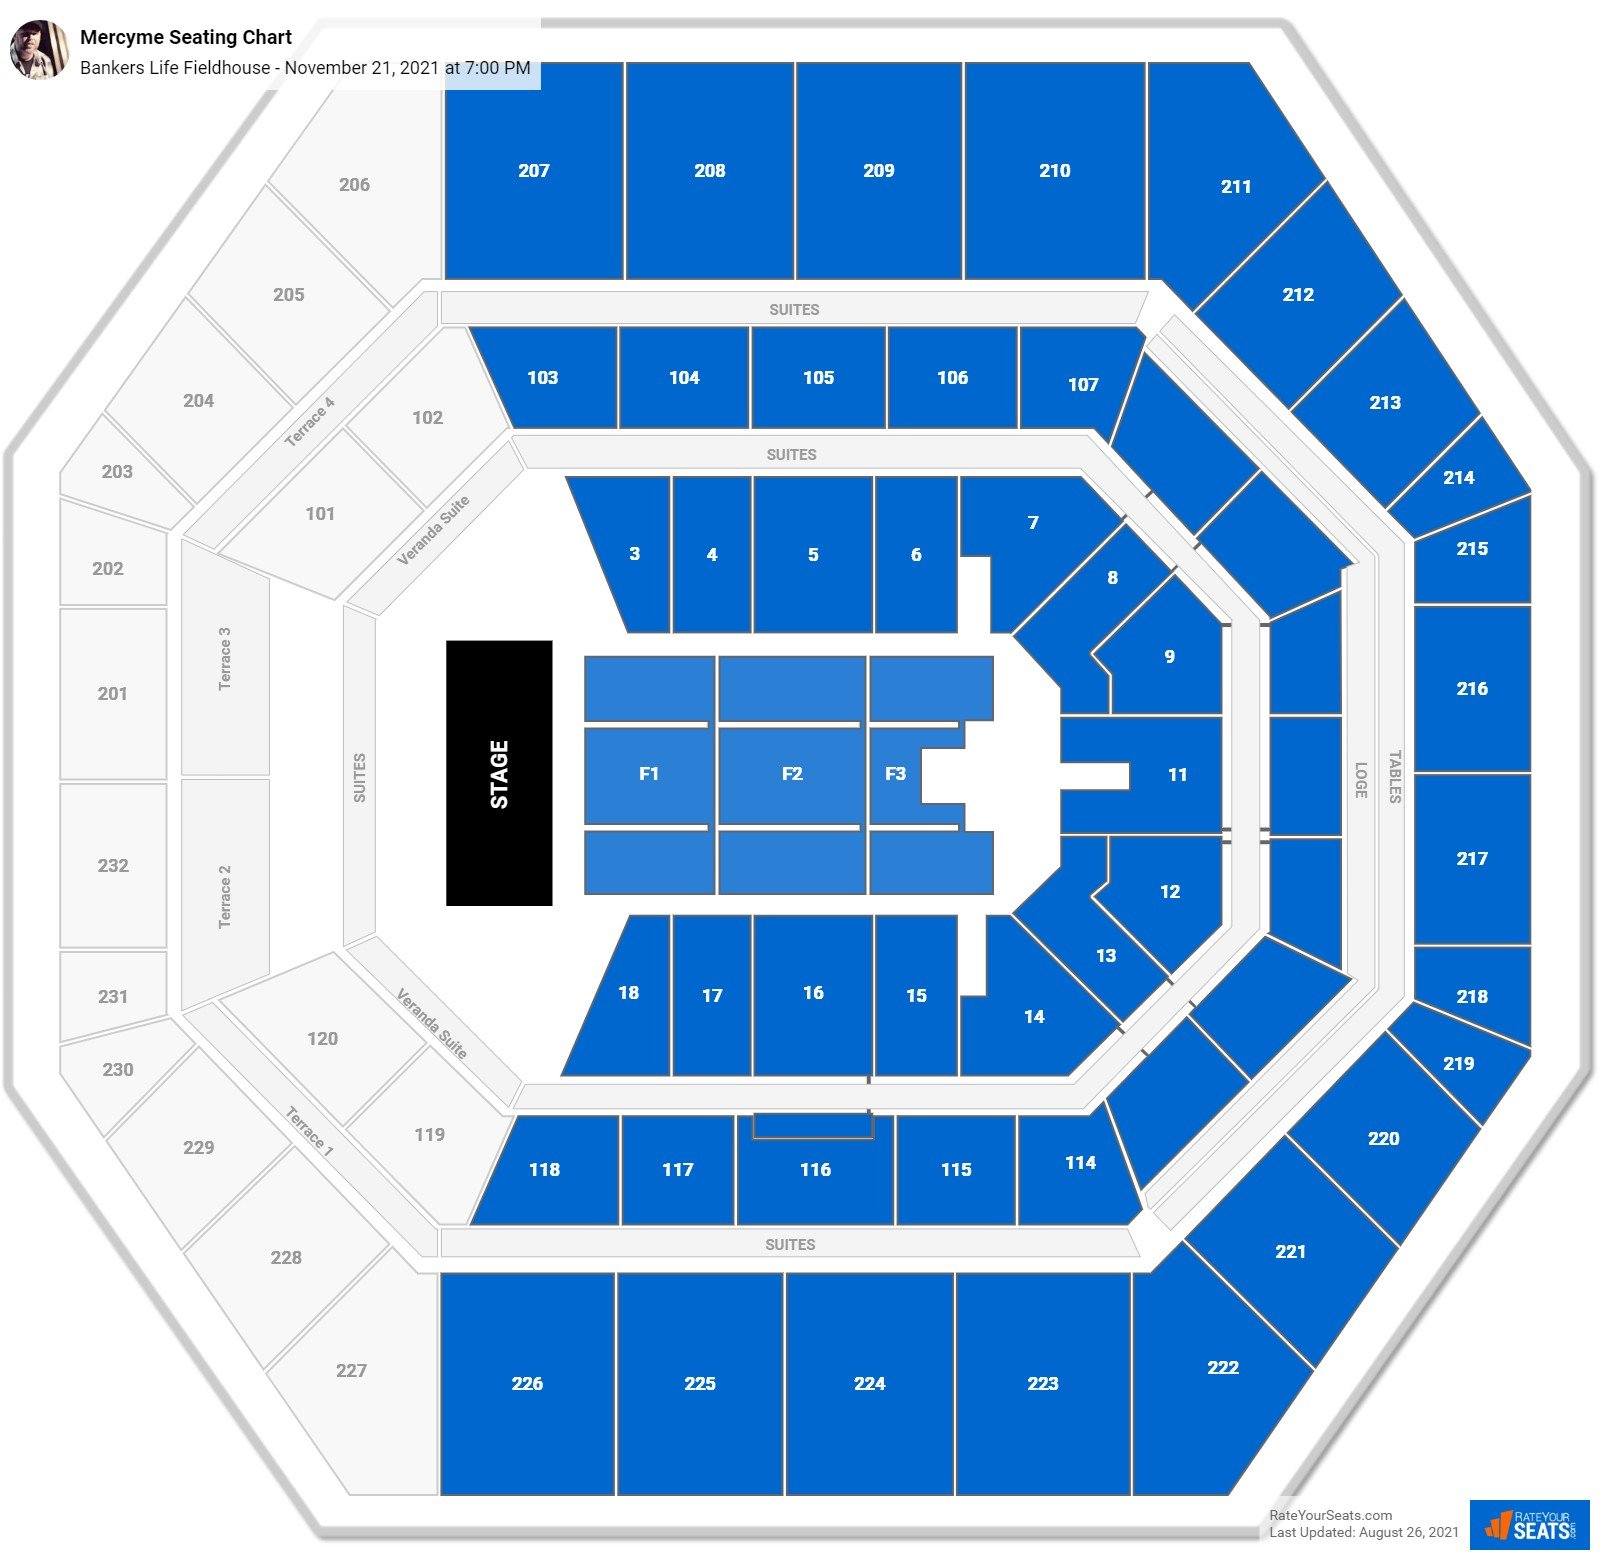 Bankers Life Fieldhouse Seating Charts for Concerts